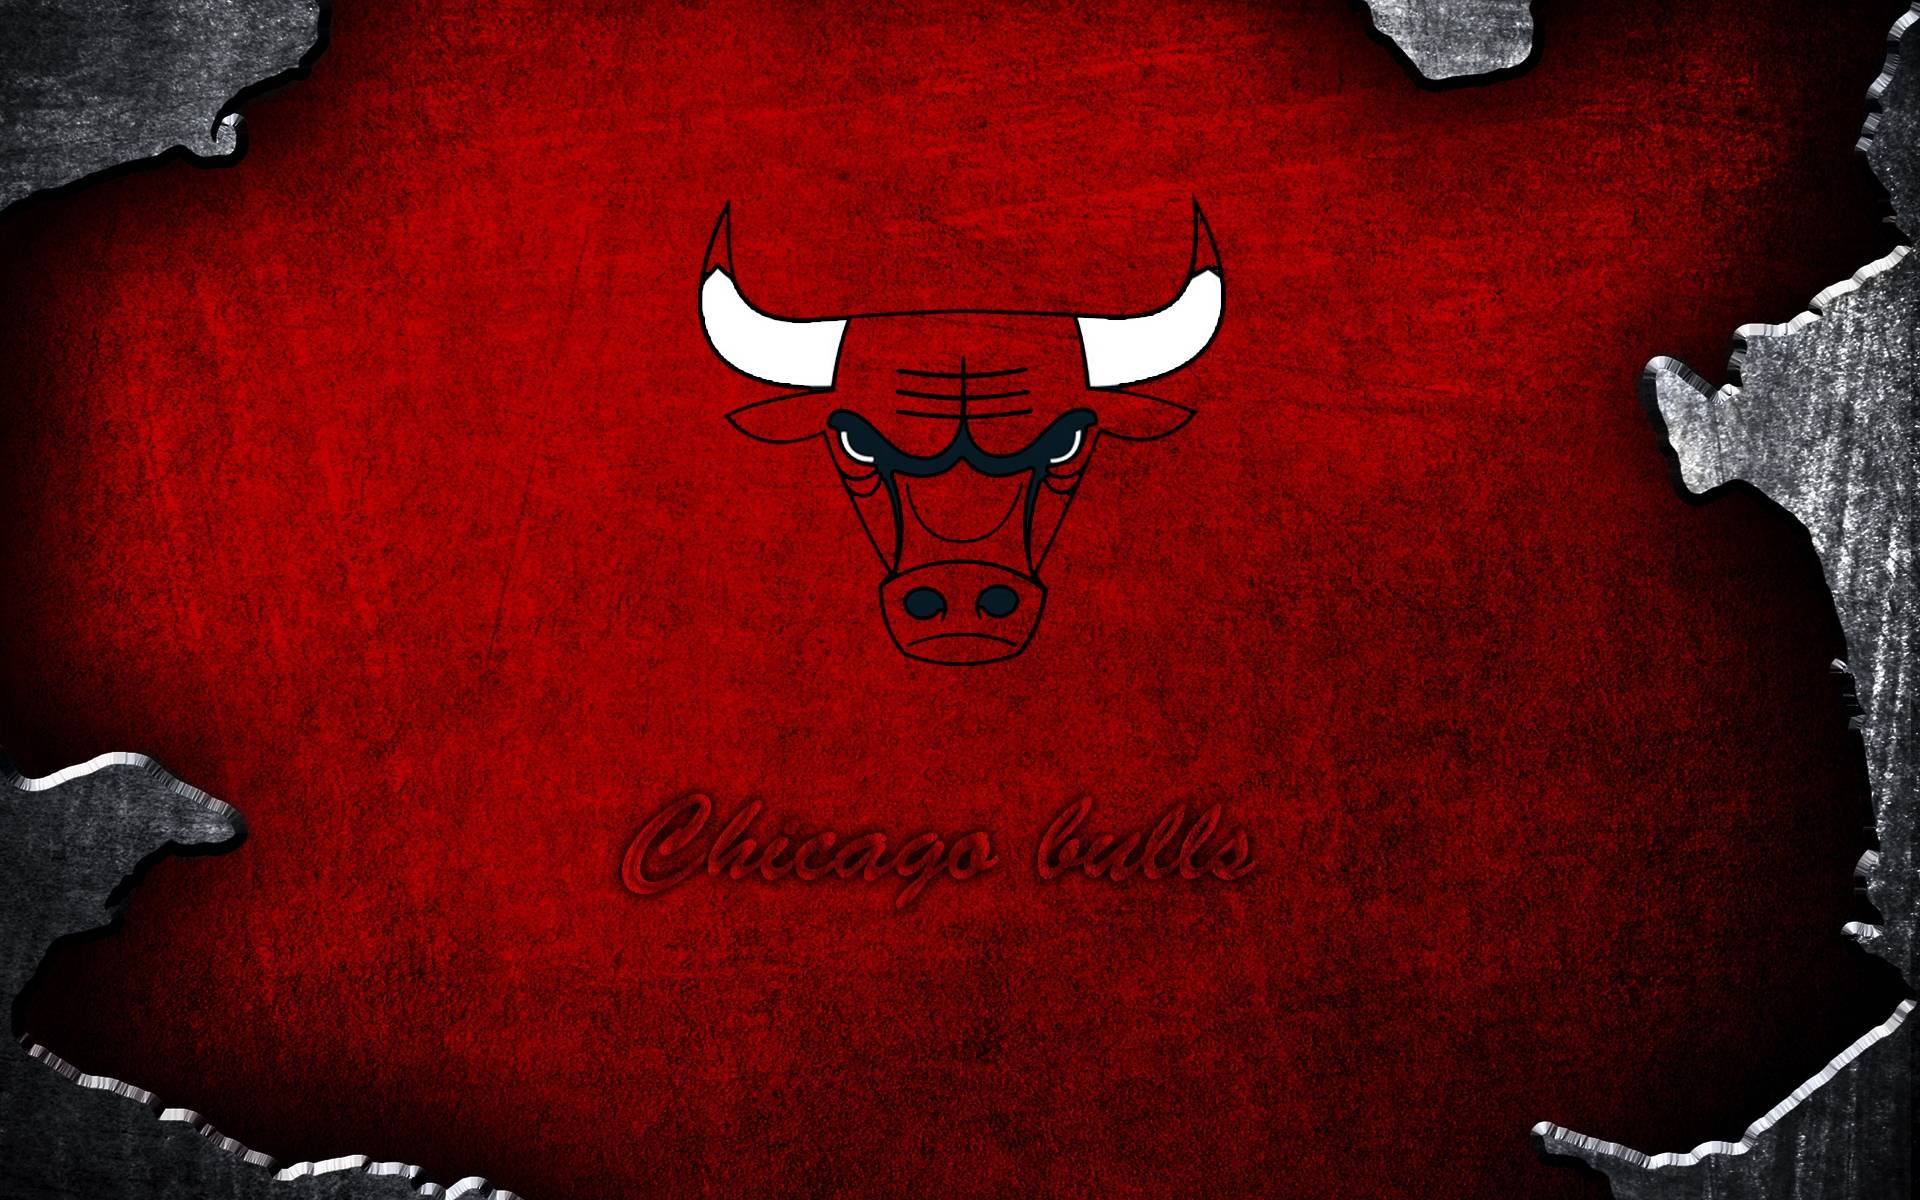 Chicago Bulls Wallpaper For Android Wallpaper. Wallshed